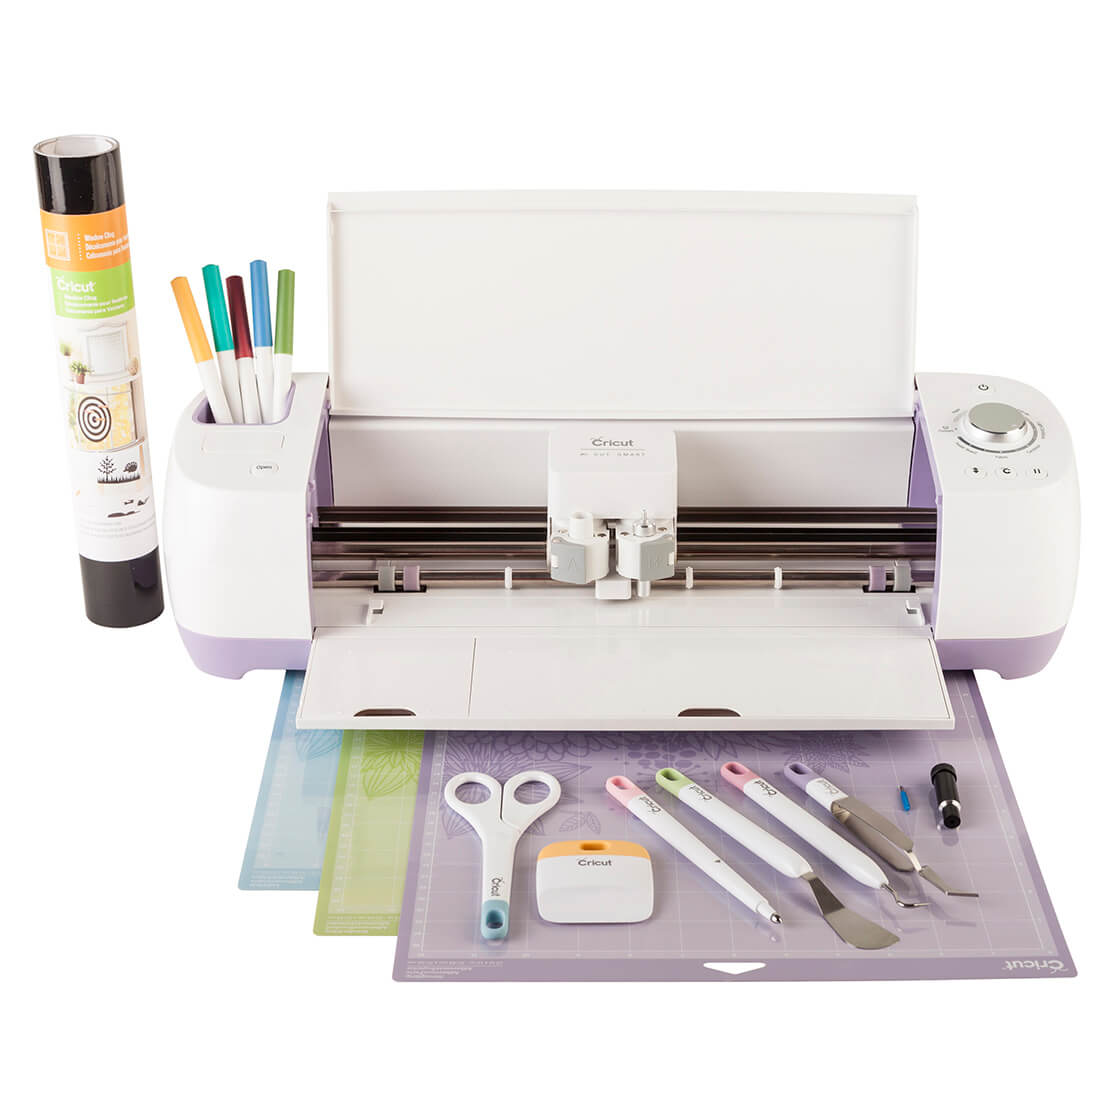 $10 Off $30 Cricut Accessories Purchase at Michael’s!